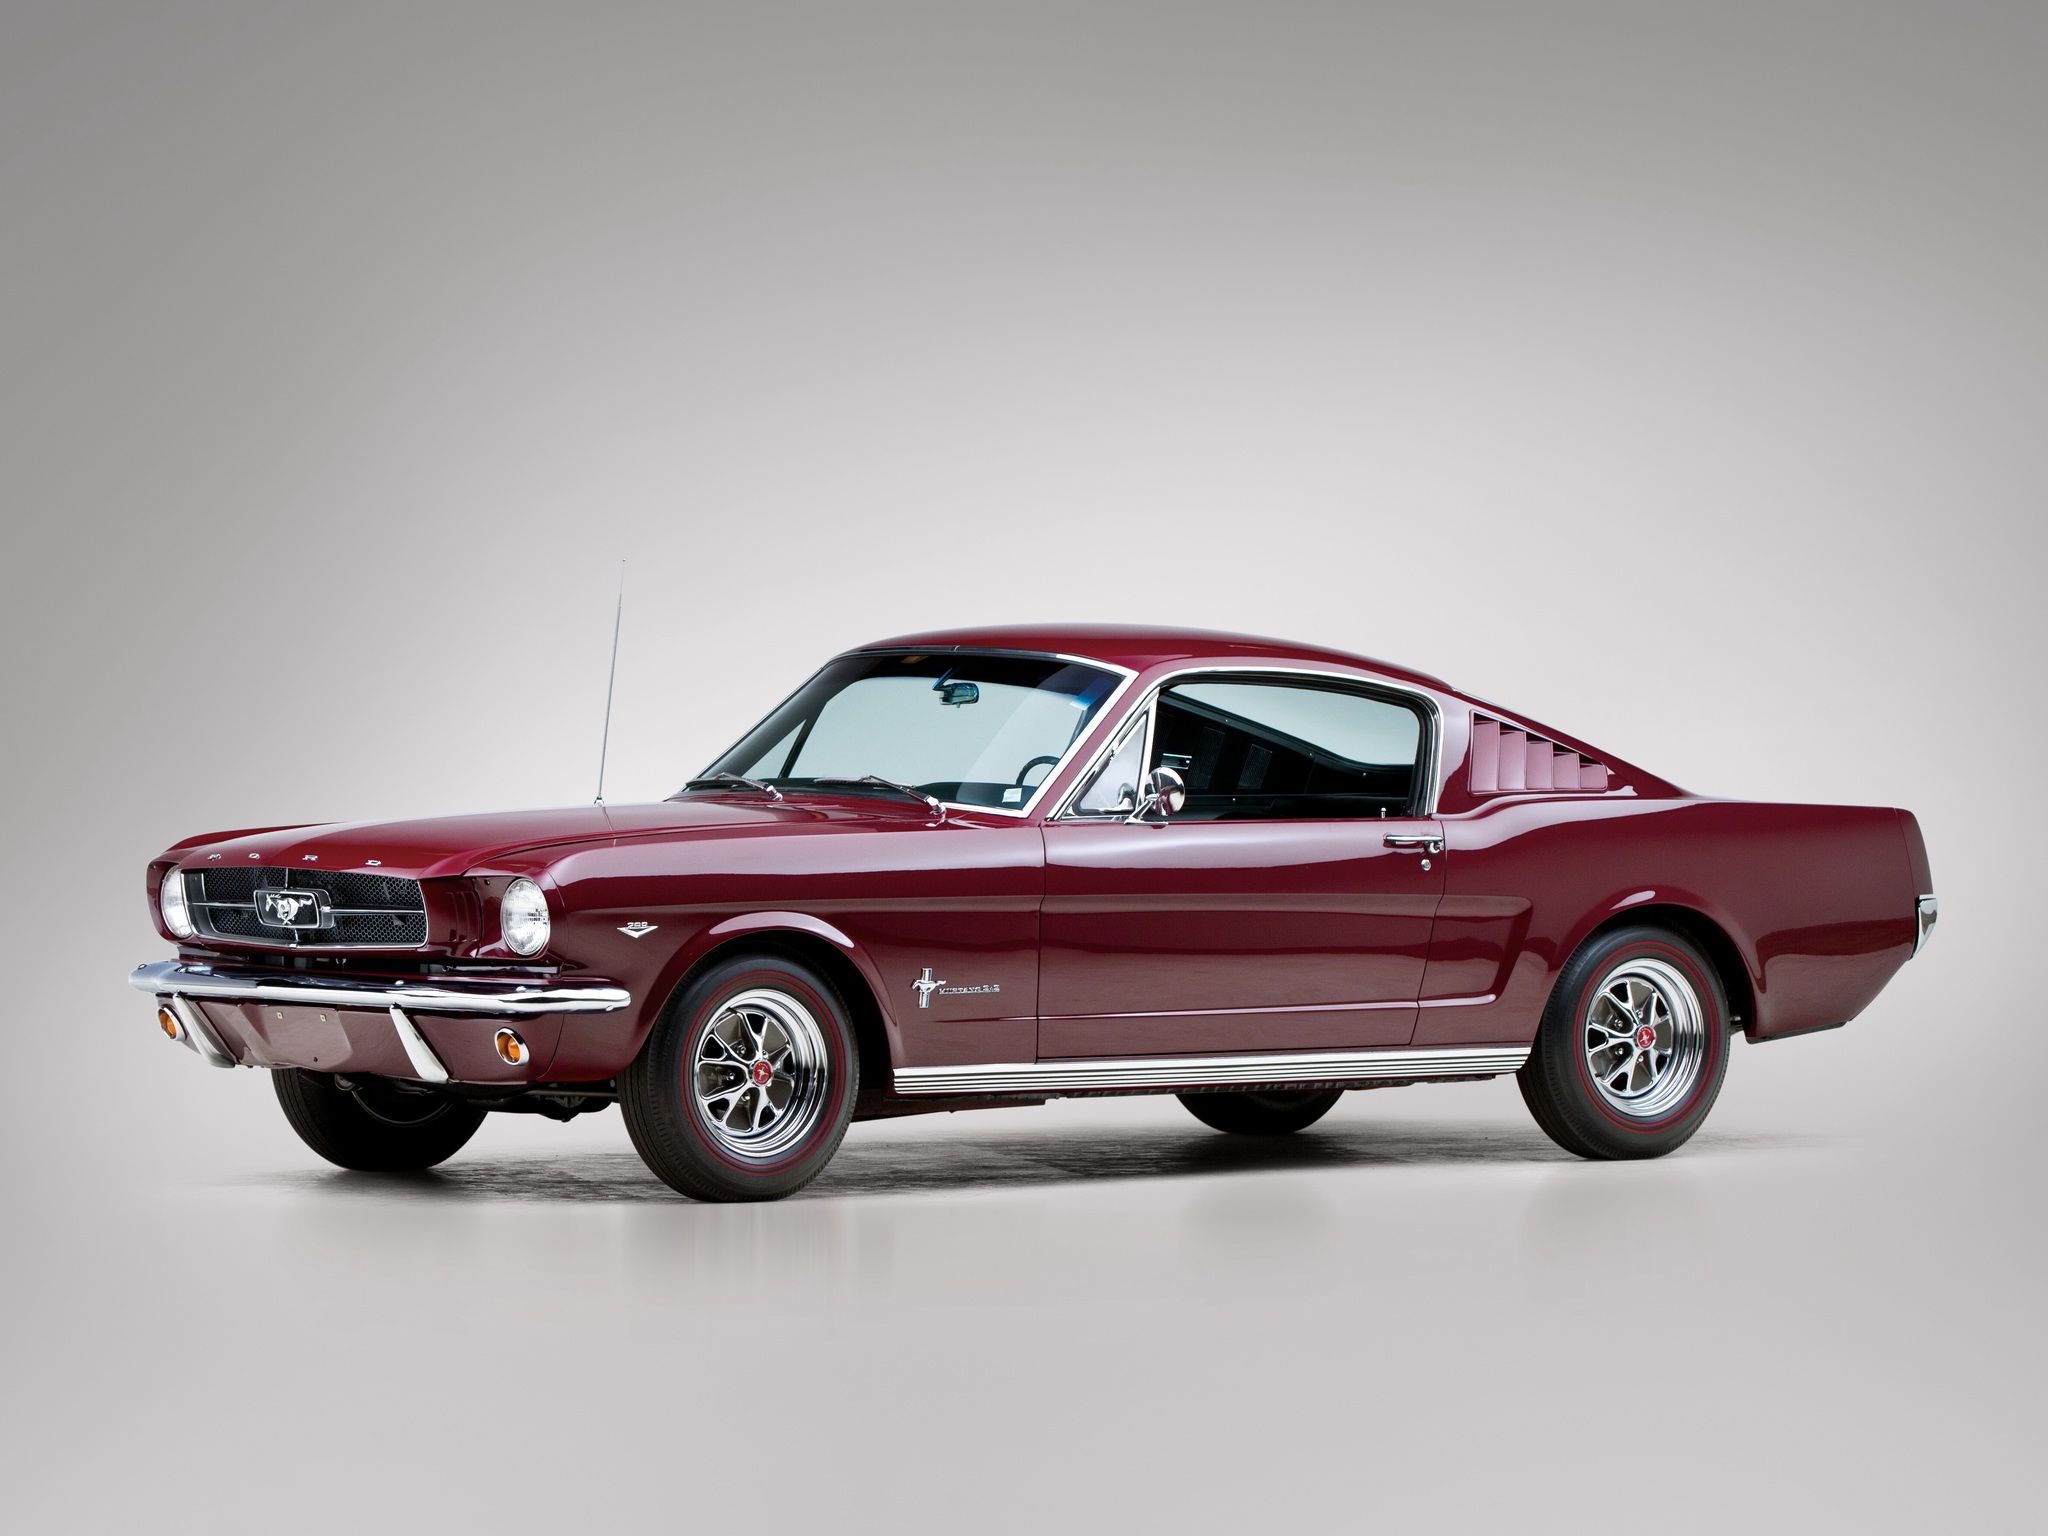 Classic Ford Mustang Wallpaper Free Classic Ford Mustang